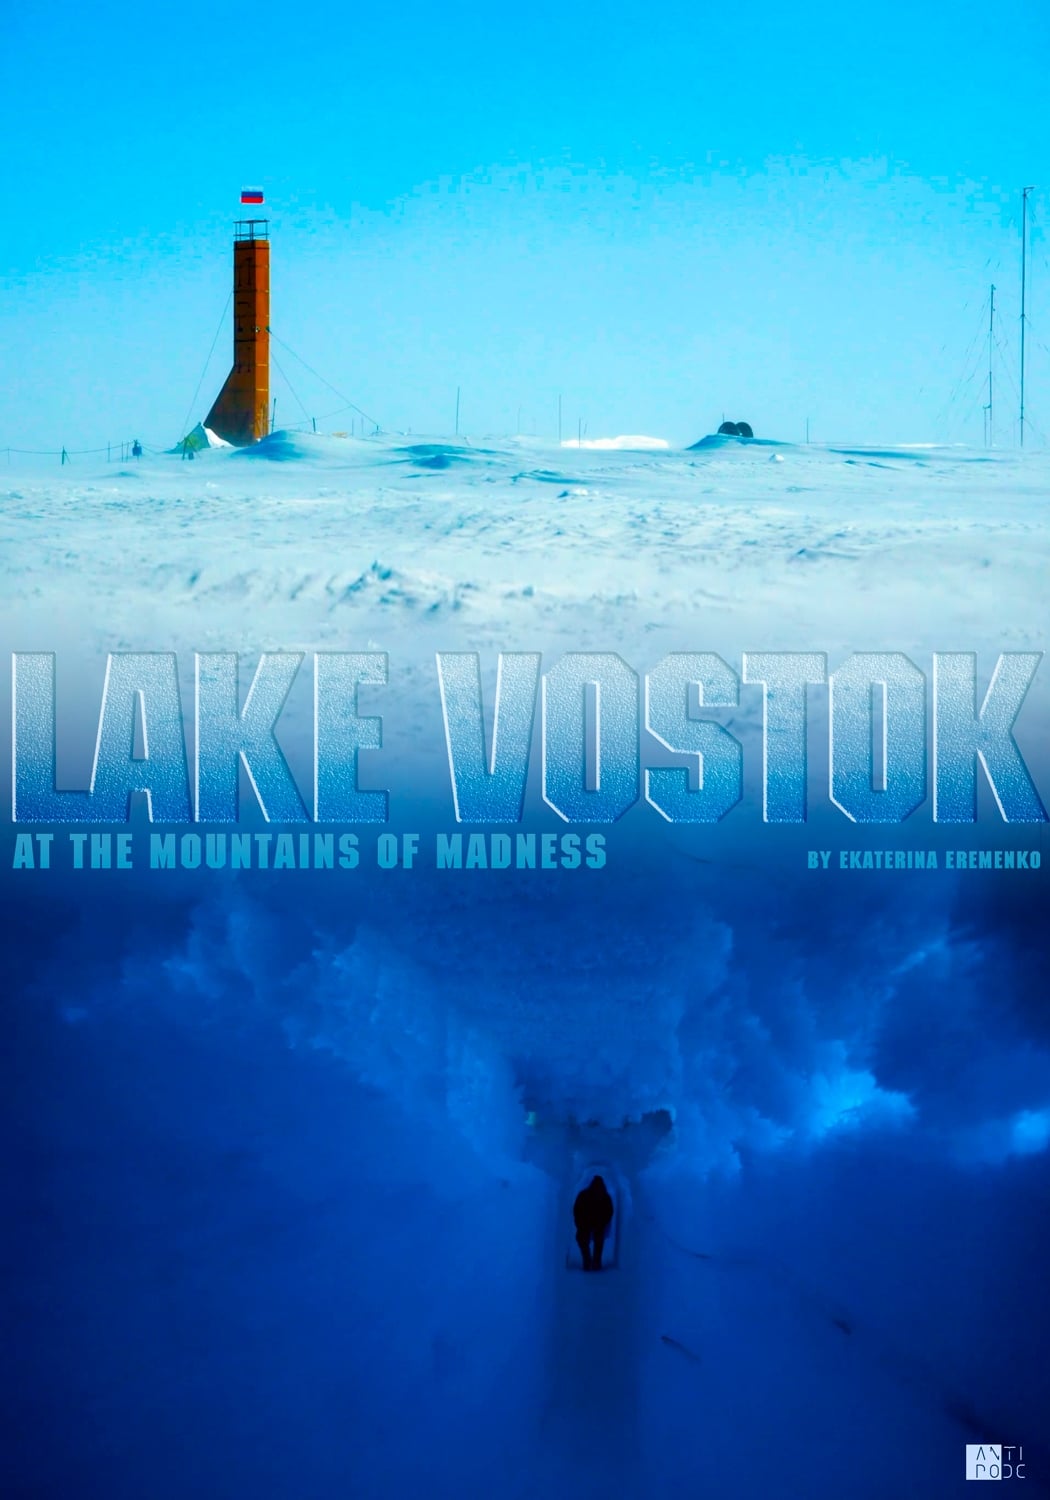 Lake Vostok. At the Mountains of Madness